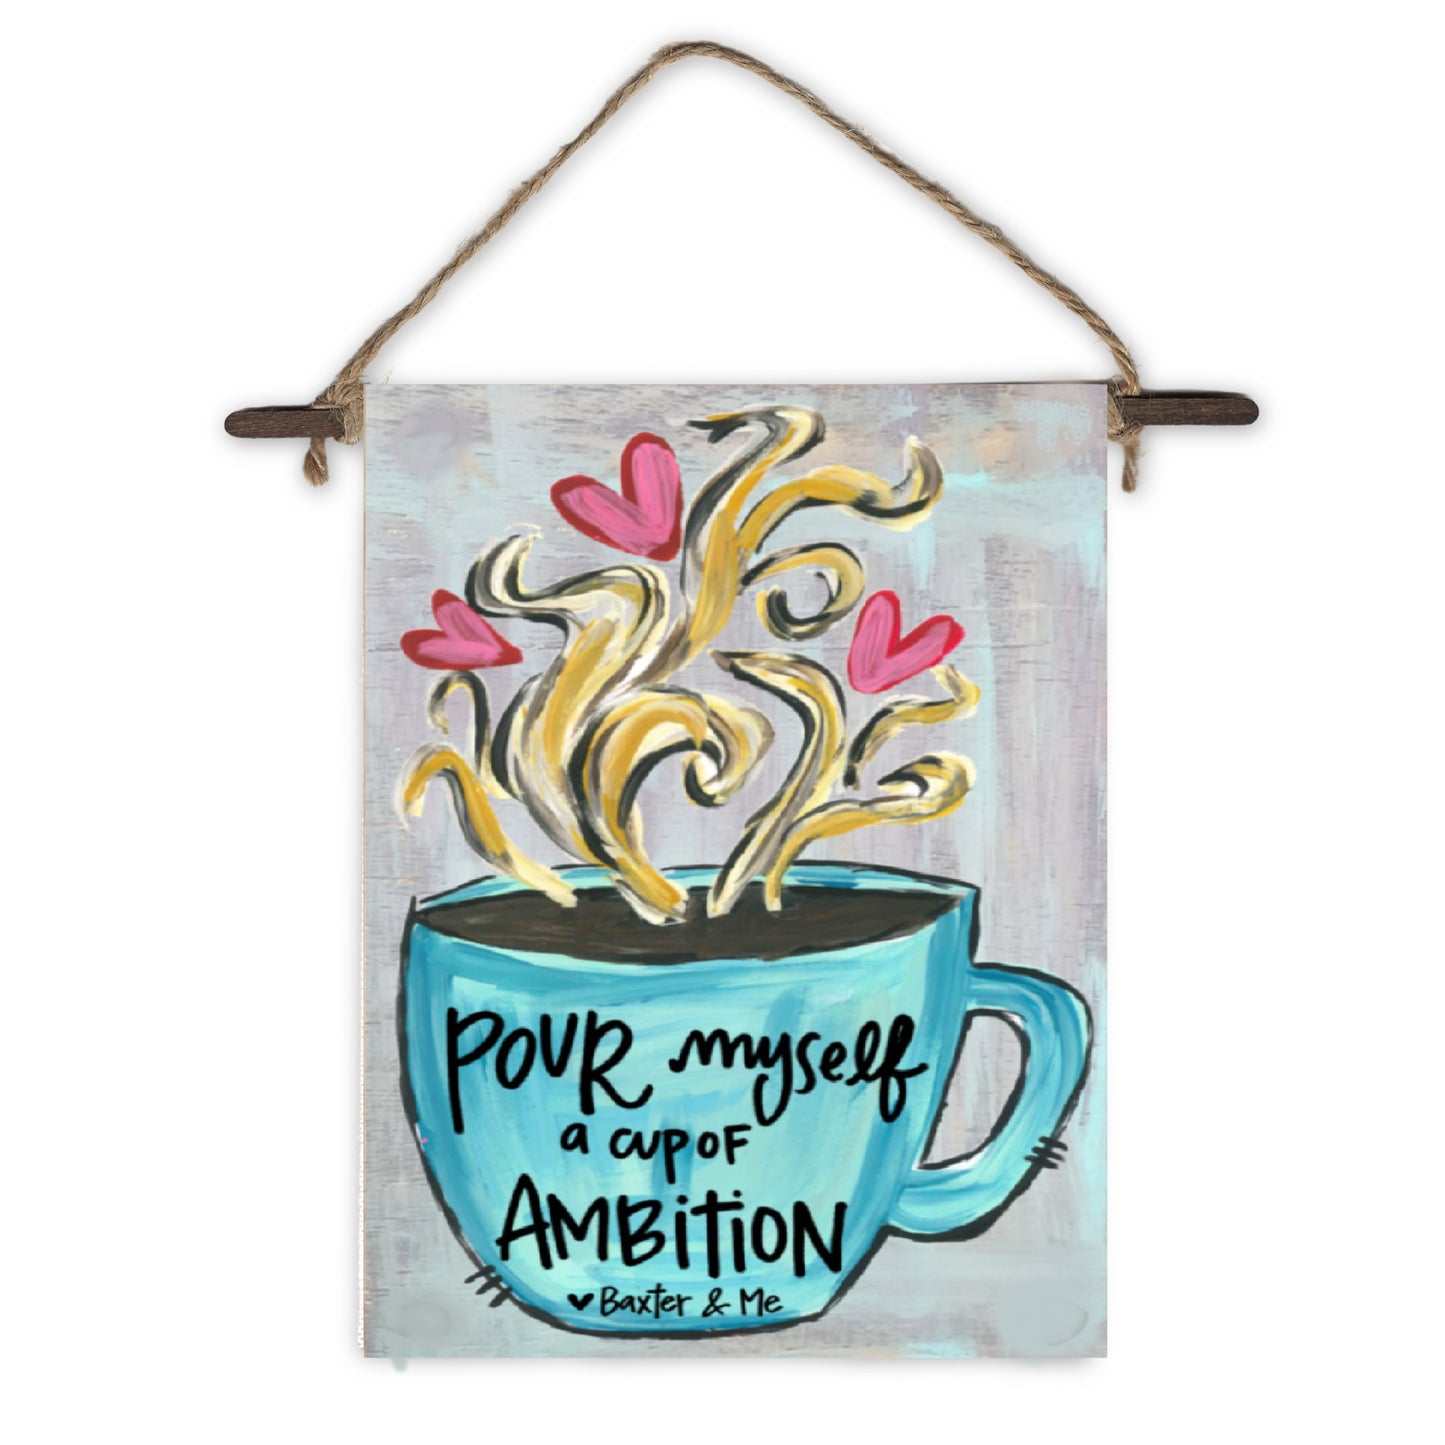 Cup of Ambition Mini Wall Hanging